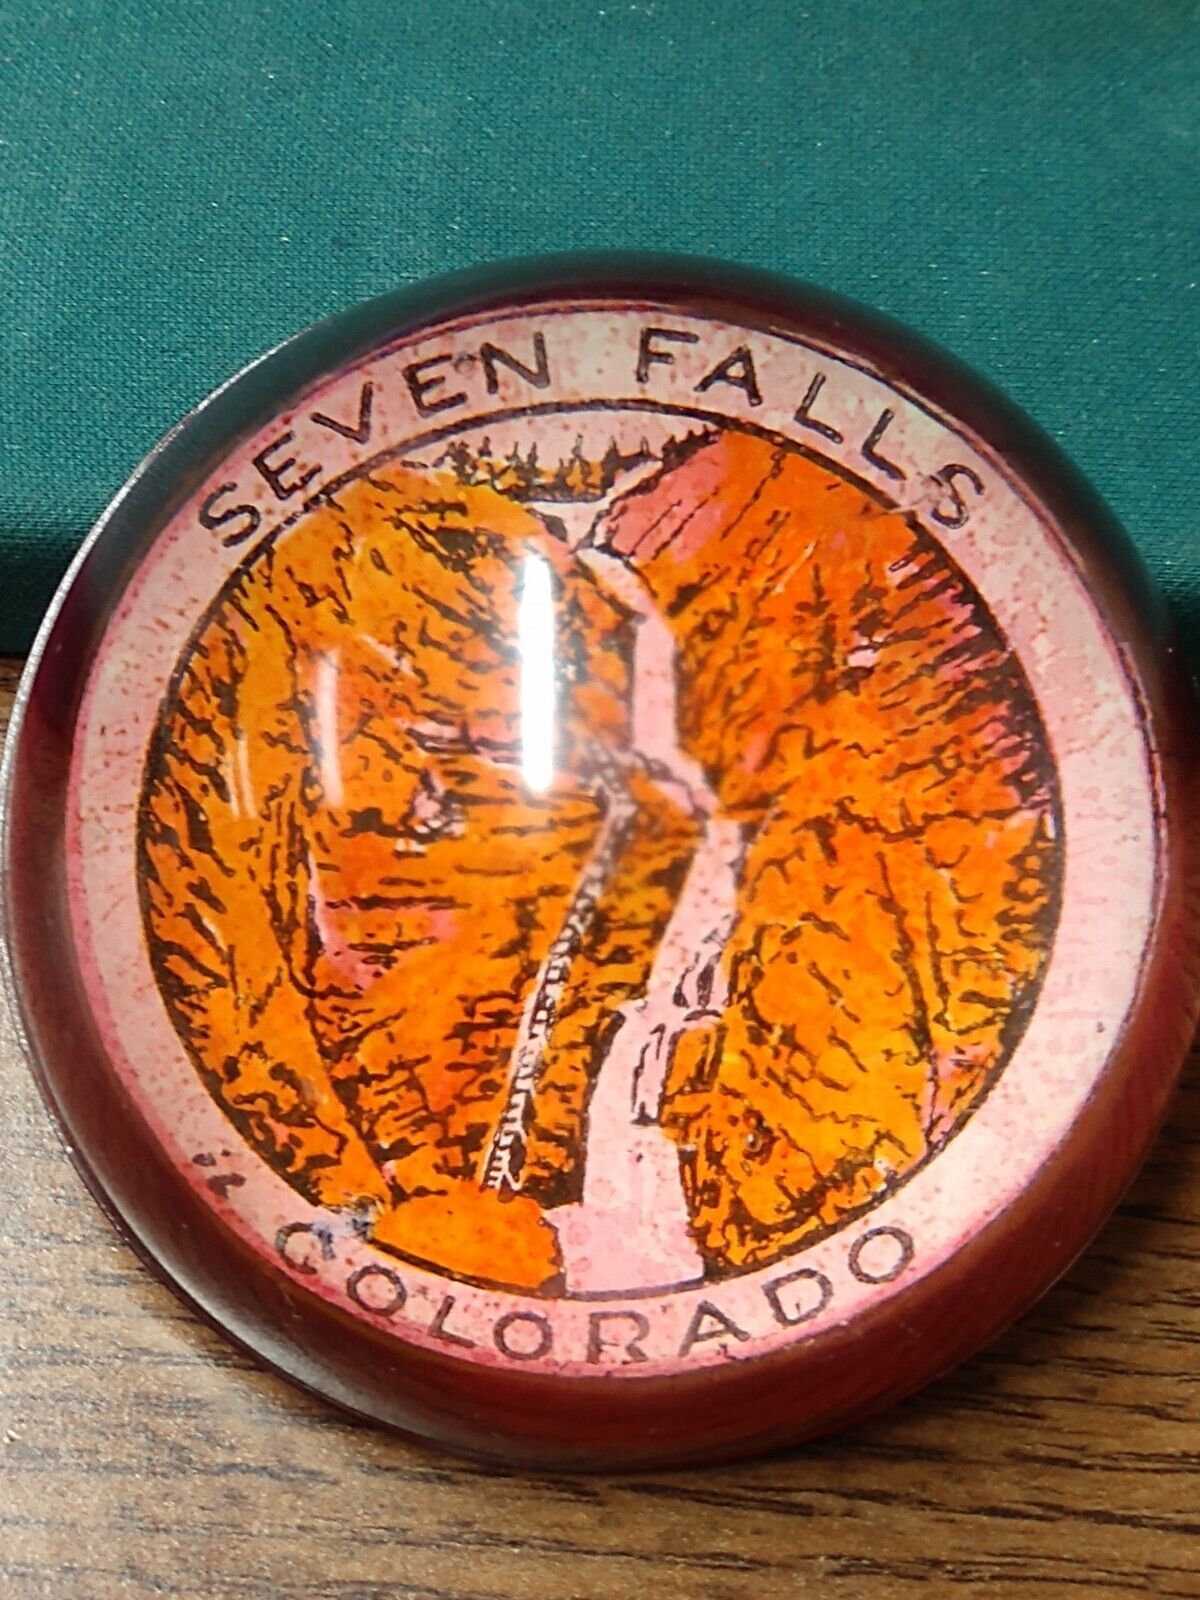 VINTAGE EARLY SEVEN FALLS COLORADO ROUND MAGENTA GLASS PAPER WEIGHT